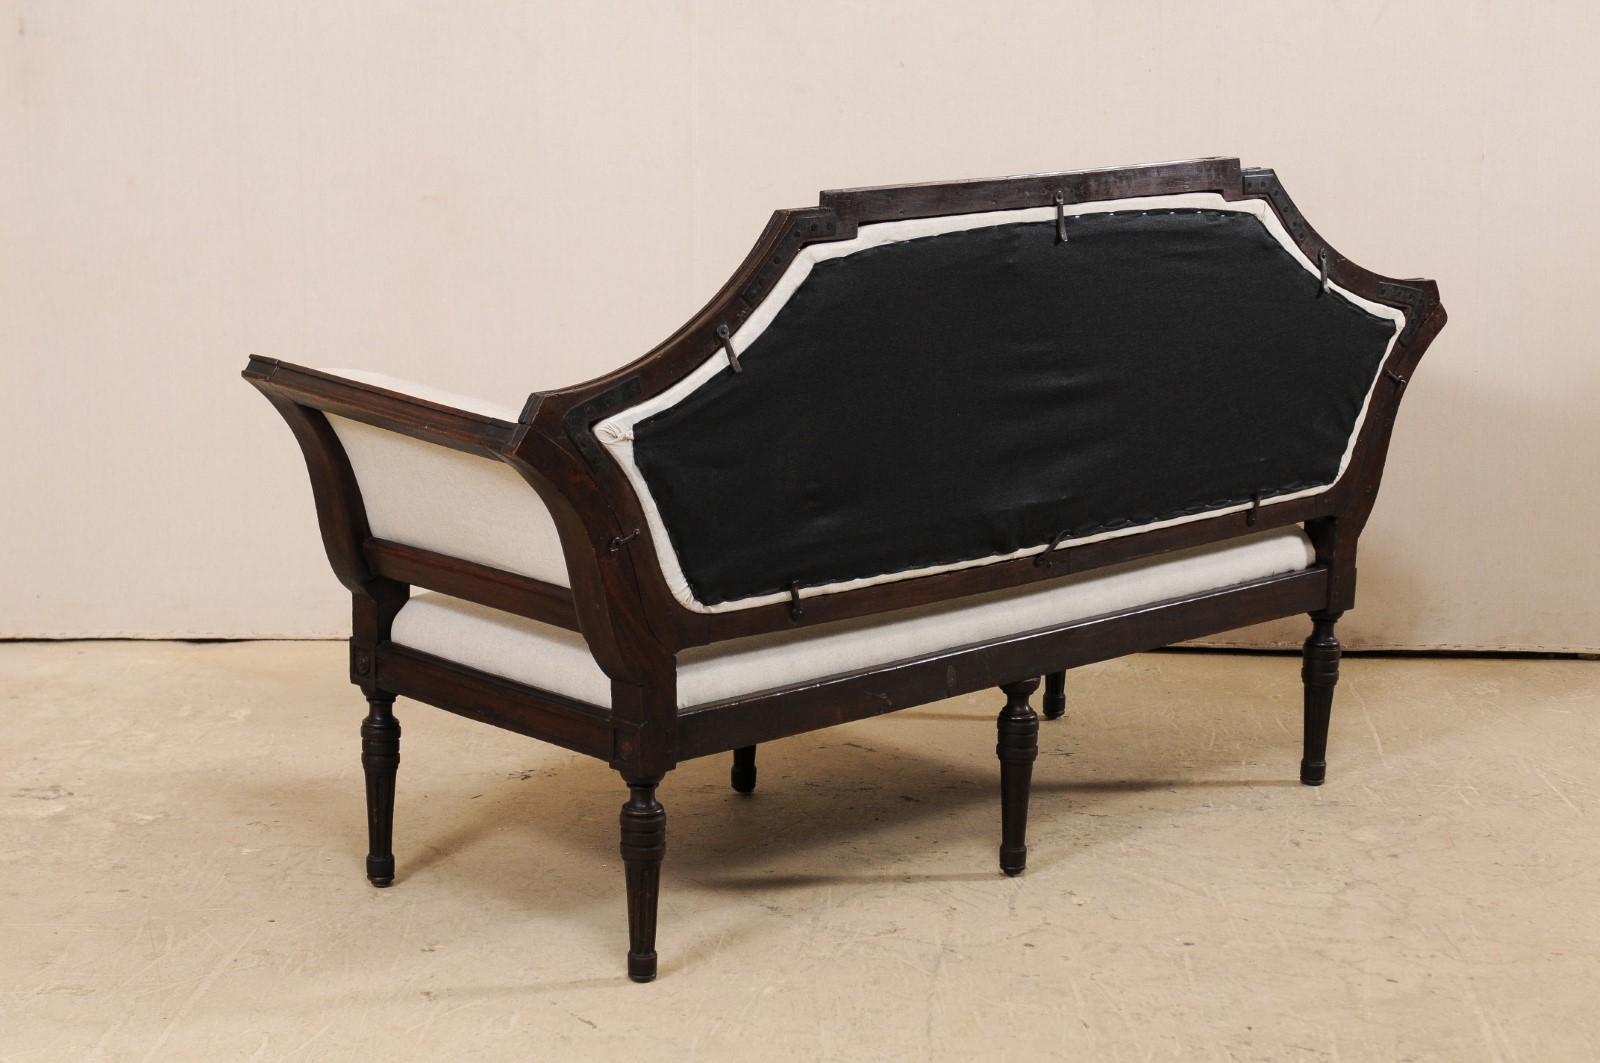 18th Century Italian Venetian Sofa with Removable Back, Converts to a Bench For Sale 2